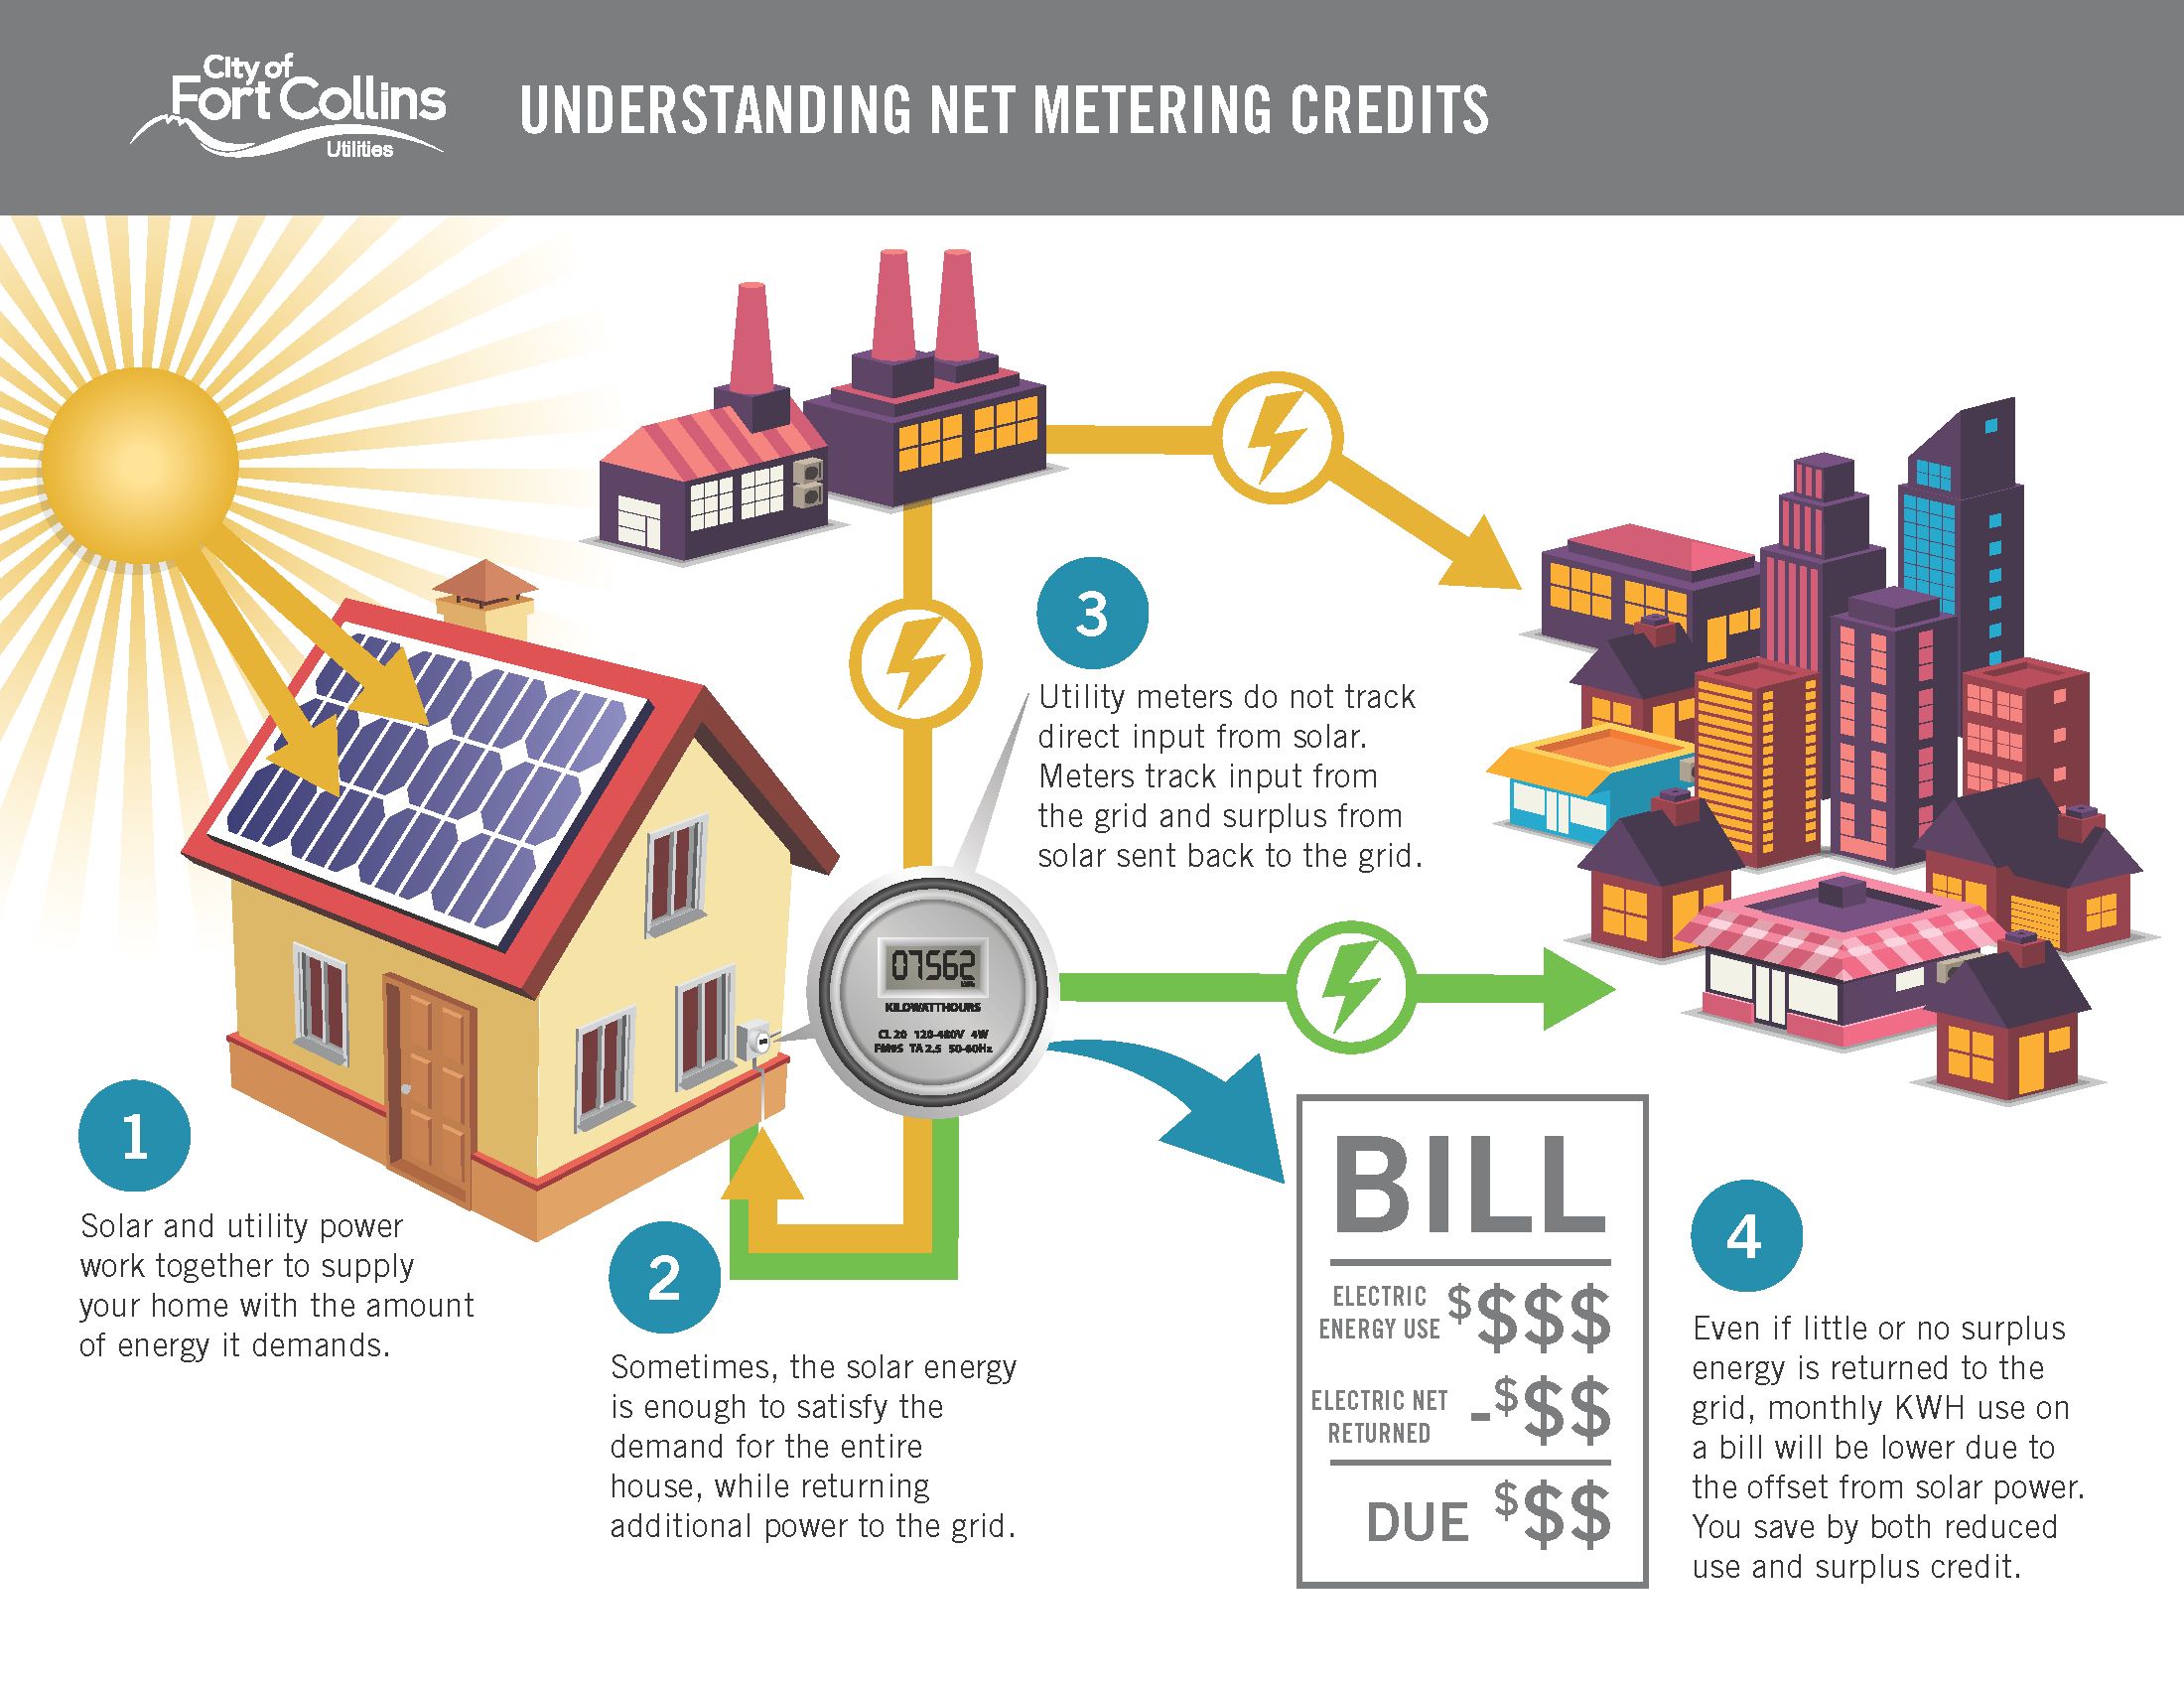 solar-rebates-australia-how-they-work-and-what-s-available-canstar-blue